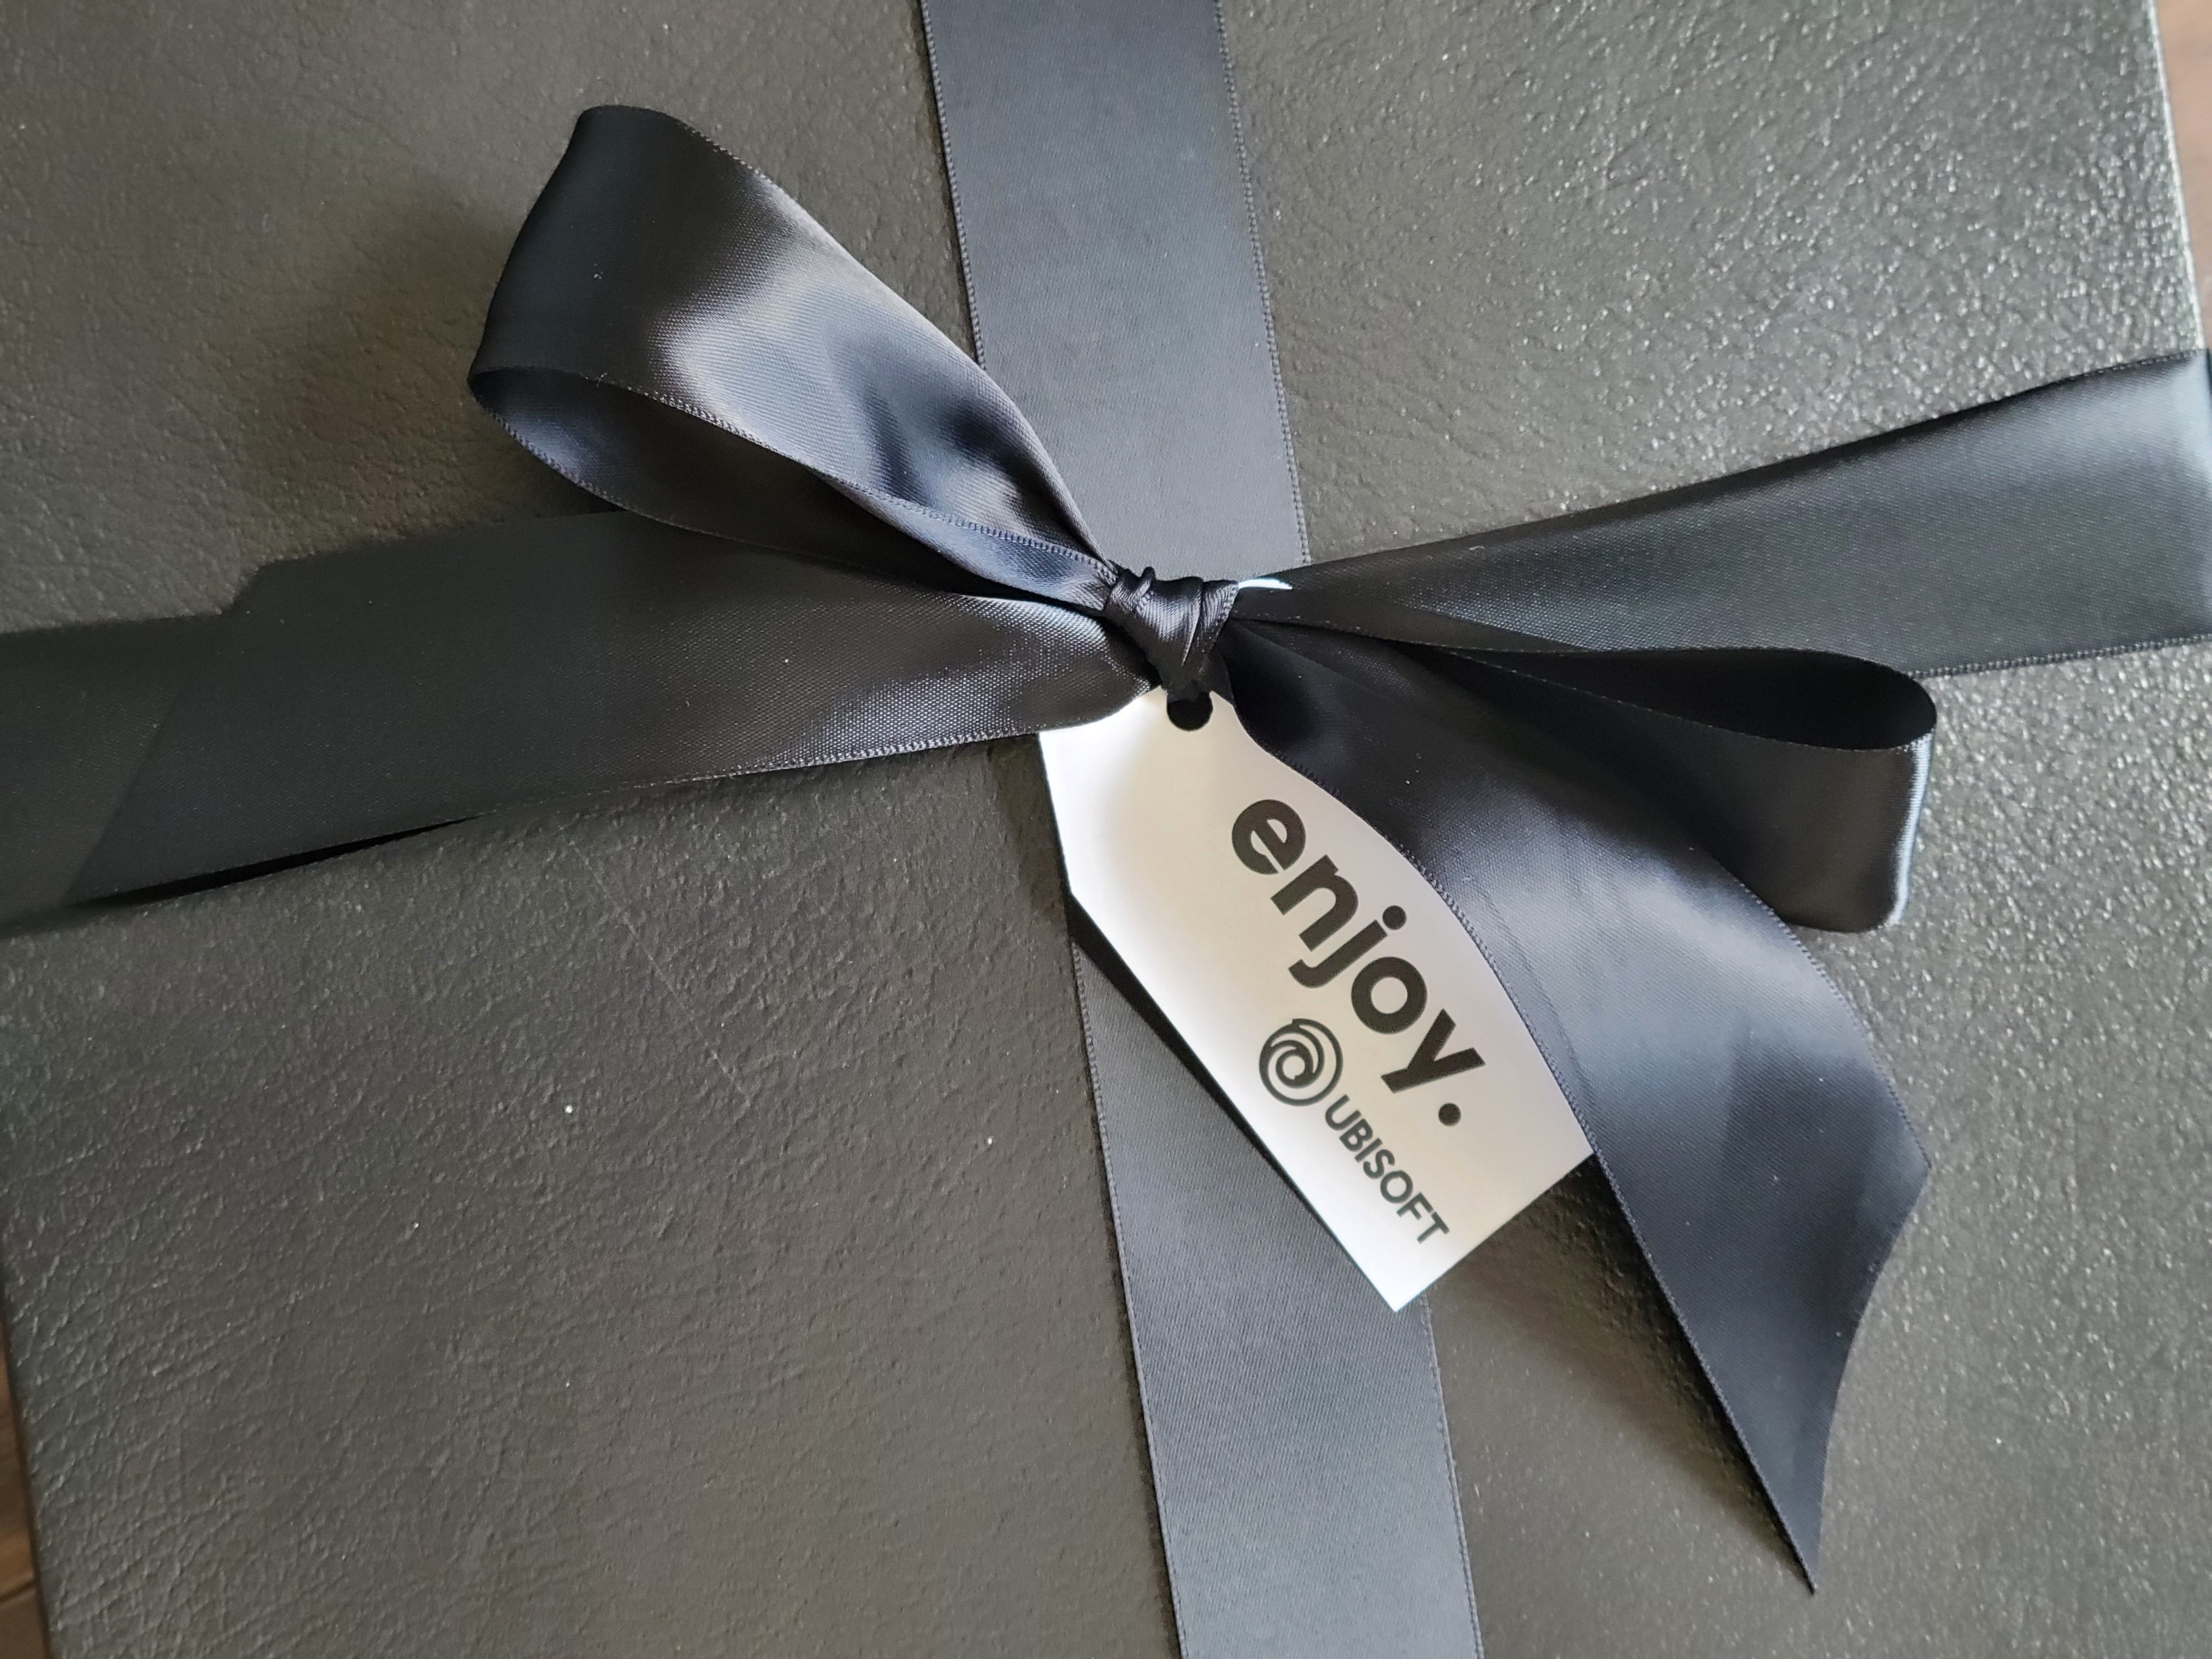 B2B Gifting Best Practices: How To Make a Positive Impact